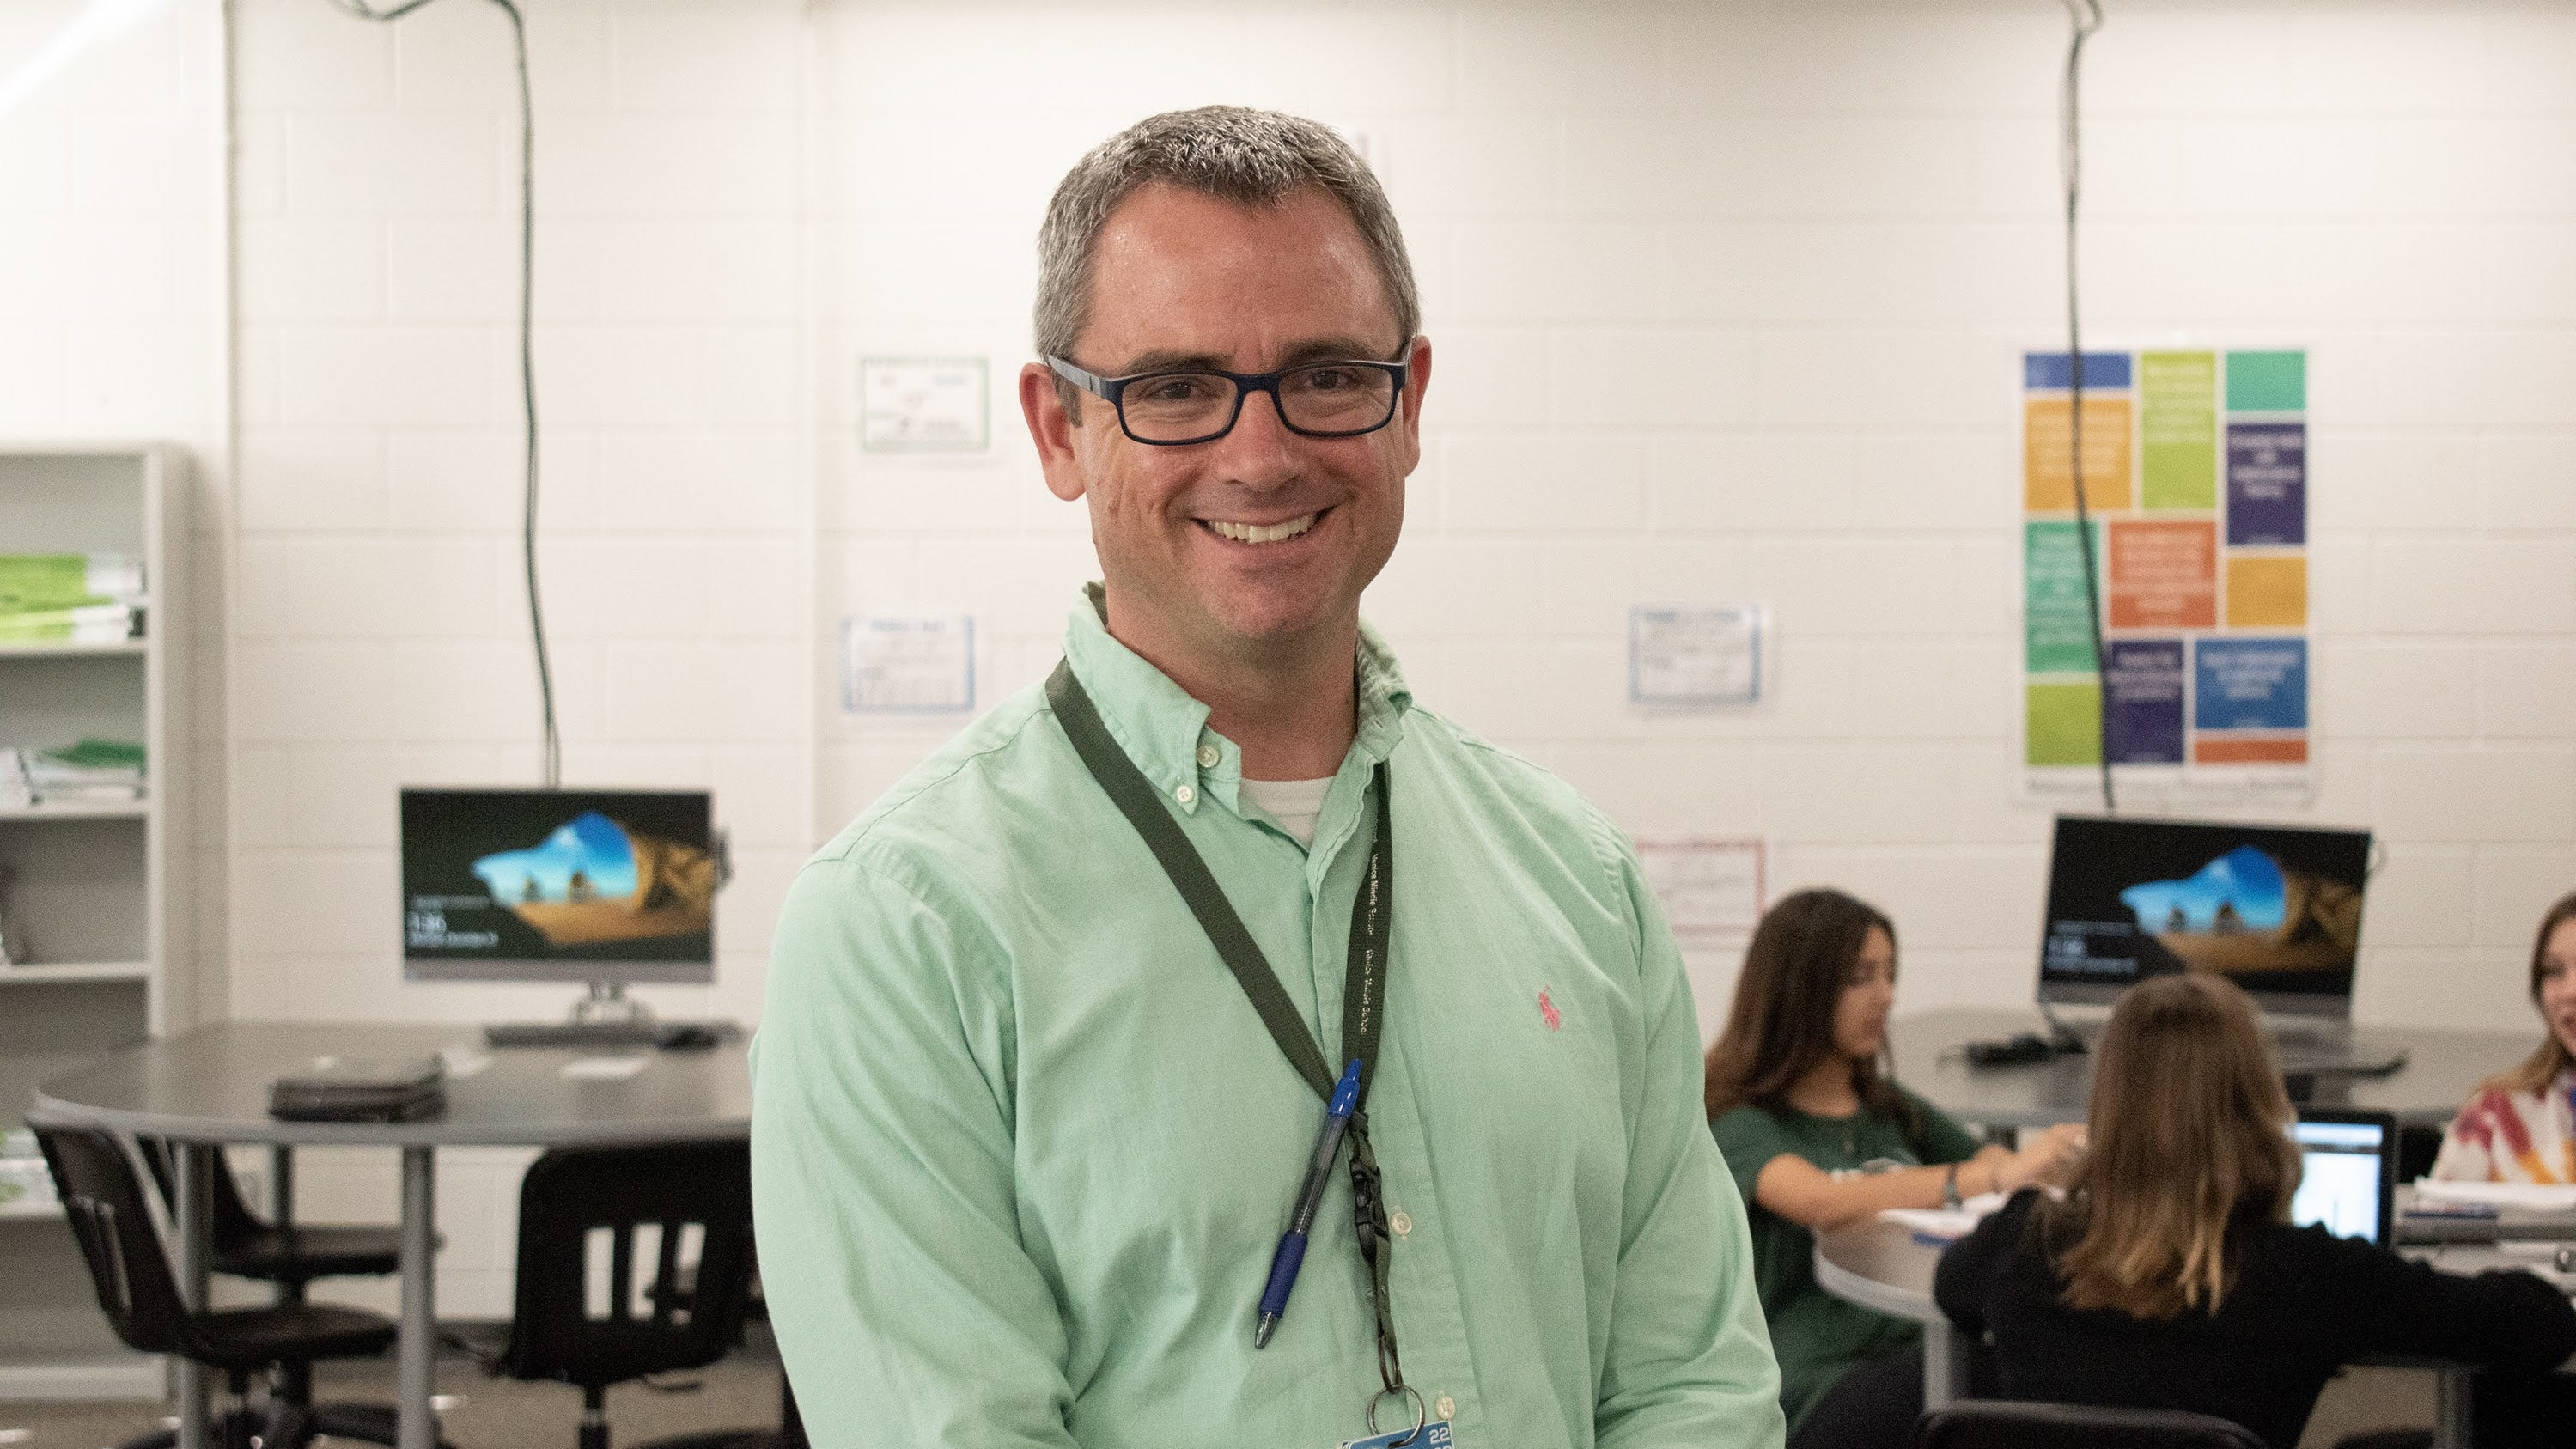  Sarasota Teacher of the Year: Helping students learn how to learn 